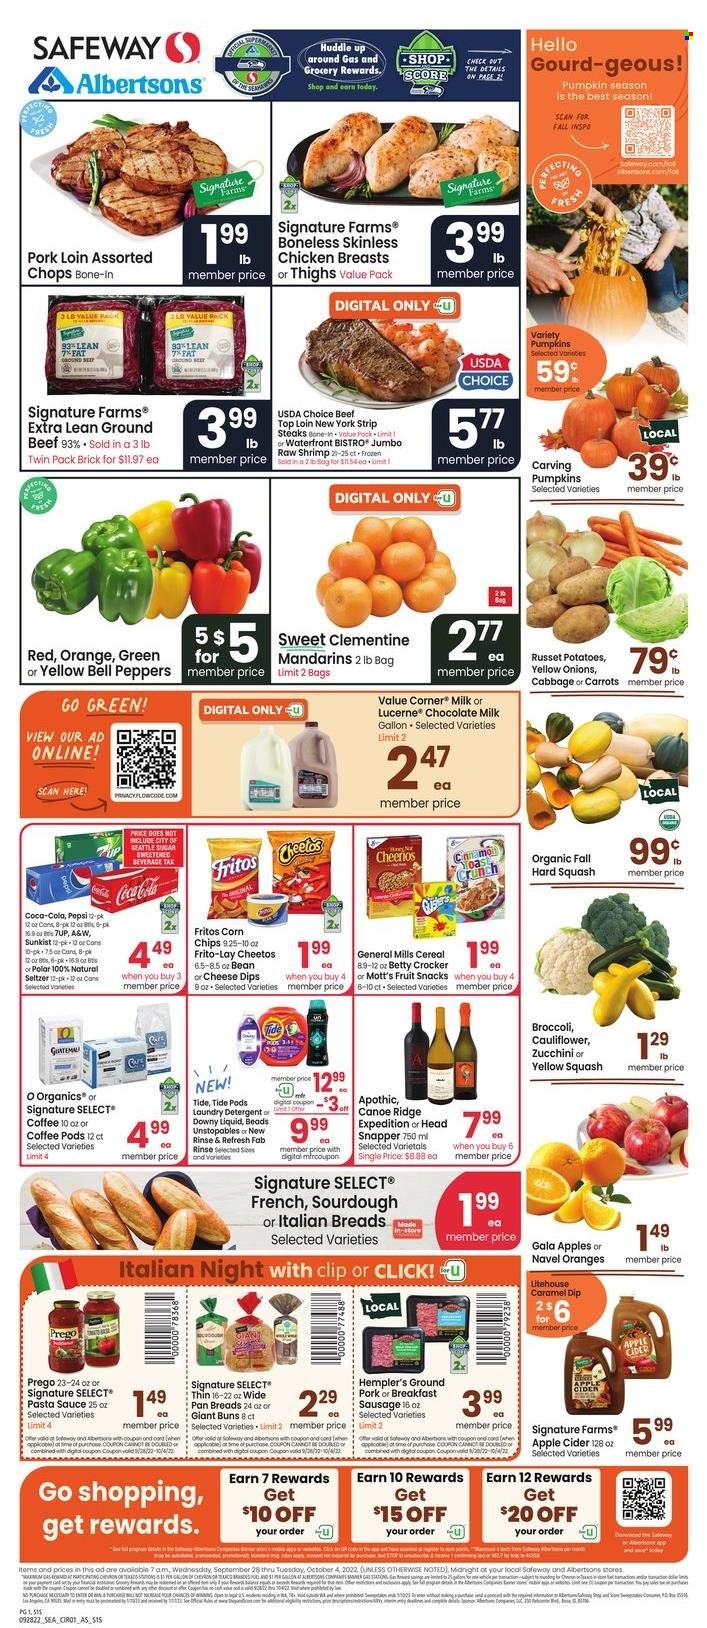 thumbnail - Safeway Flyer - 09/28/2022 - 10/04/2022 - Sales products - buns, bell peppers, broccoli, carrots, russet potatoes, zucchini, potatoes, pumpkin, peppers, yellow squash, Gala, mandarines, Mott's, chicken breasts, beef meat, ground beef, steak, striploin steak, ground pork, pork loin, pork meat, shrimps, pasta sauce, sauce, sausage, milk, milk chocolate, chocolate, fruit snack, Fritos, Cheetos, corn chips, Frito-Lay, sugar, cereals, Cheerios, cinnamon, caramel, Coca-Cola, Pepsi, 7UP, A&W, seltzer water, coffee pods, apple cider, cider, detergent, Tide, Unstopables, Fab, laundry detergent, Downy Laundry, pan, gourd, navel oranges. Page 1.